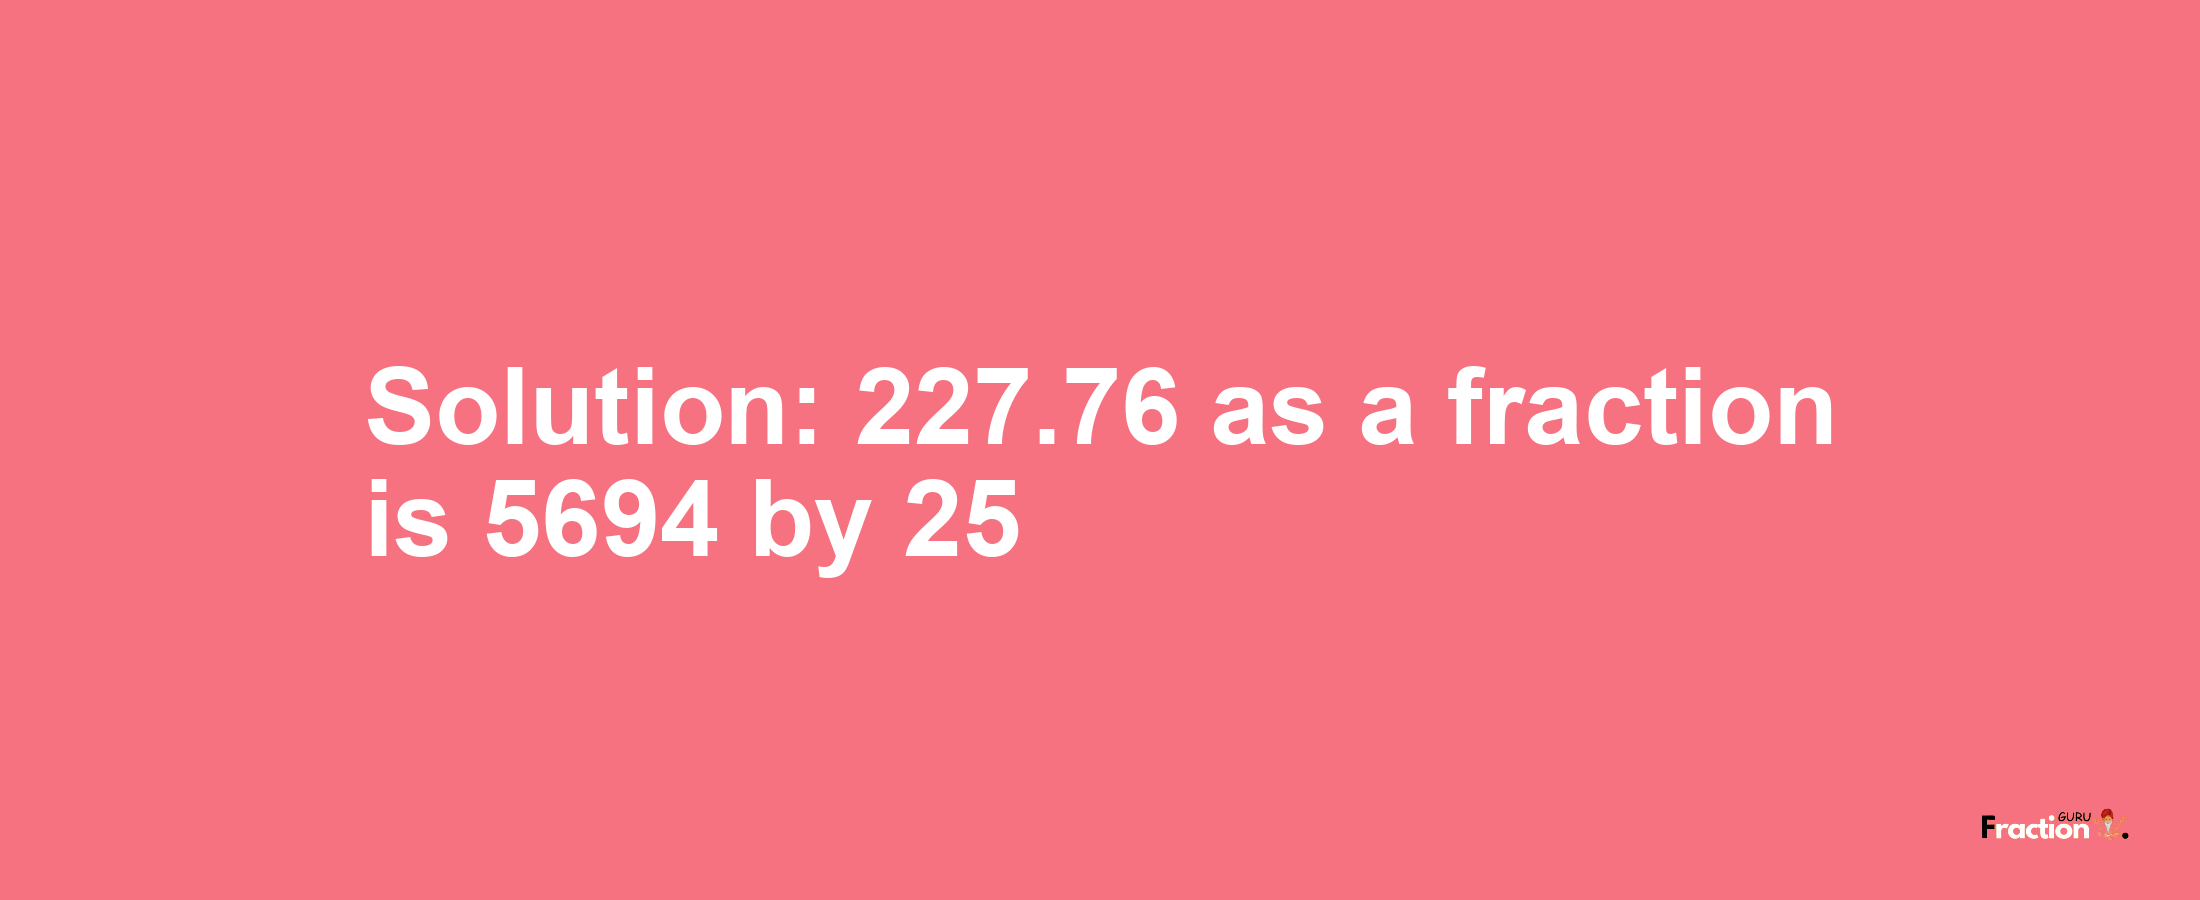 Solution:227.76 as a fraction is 5694/25